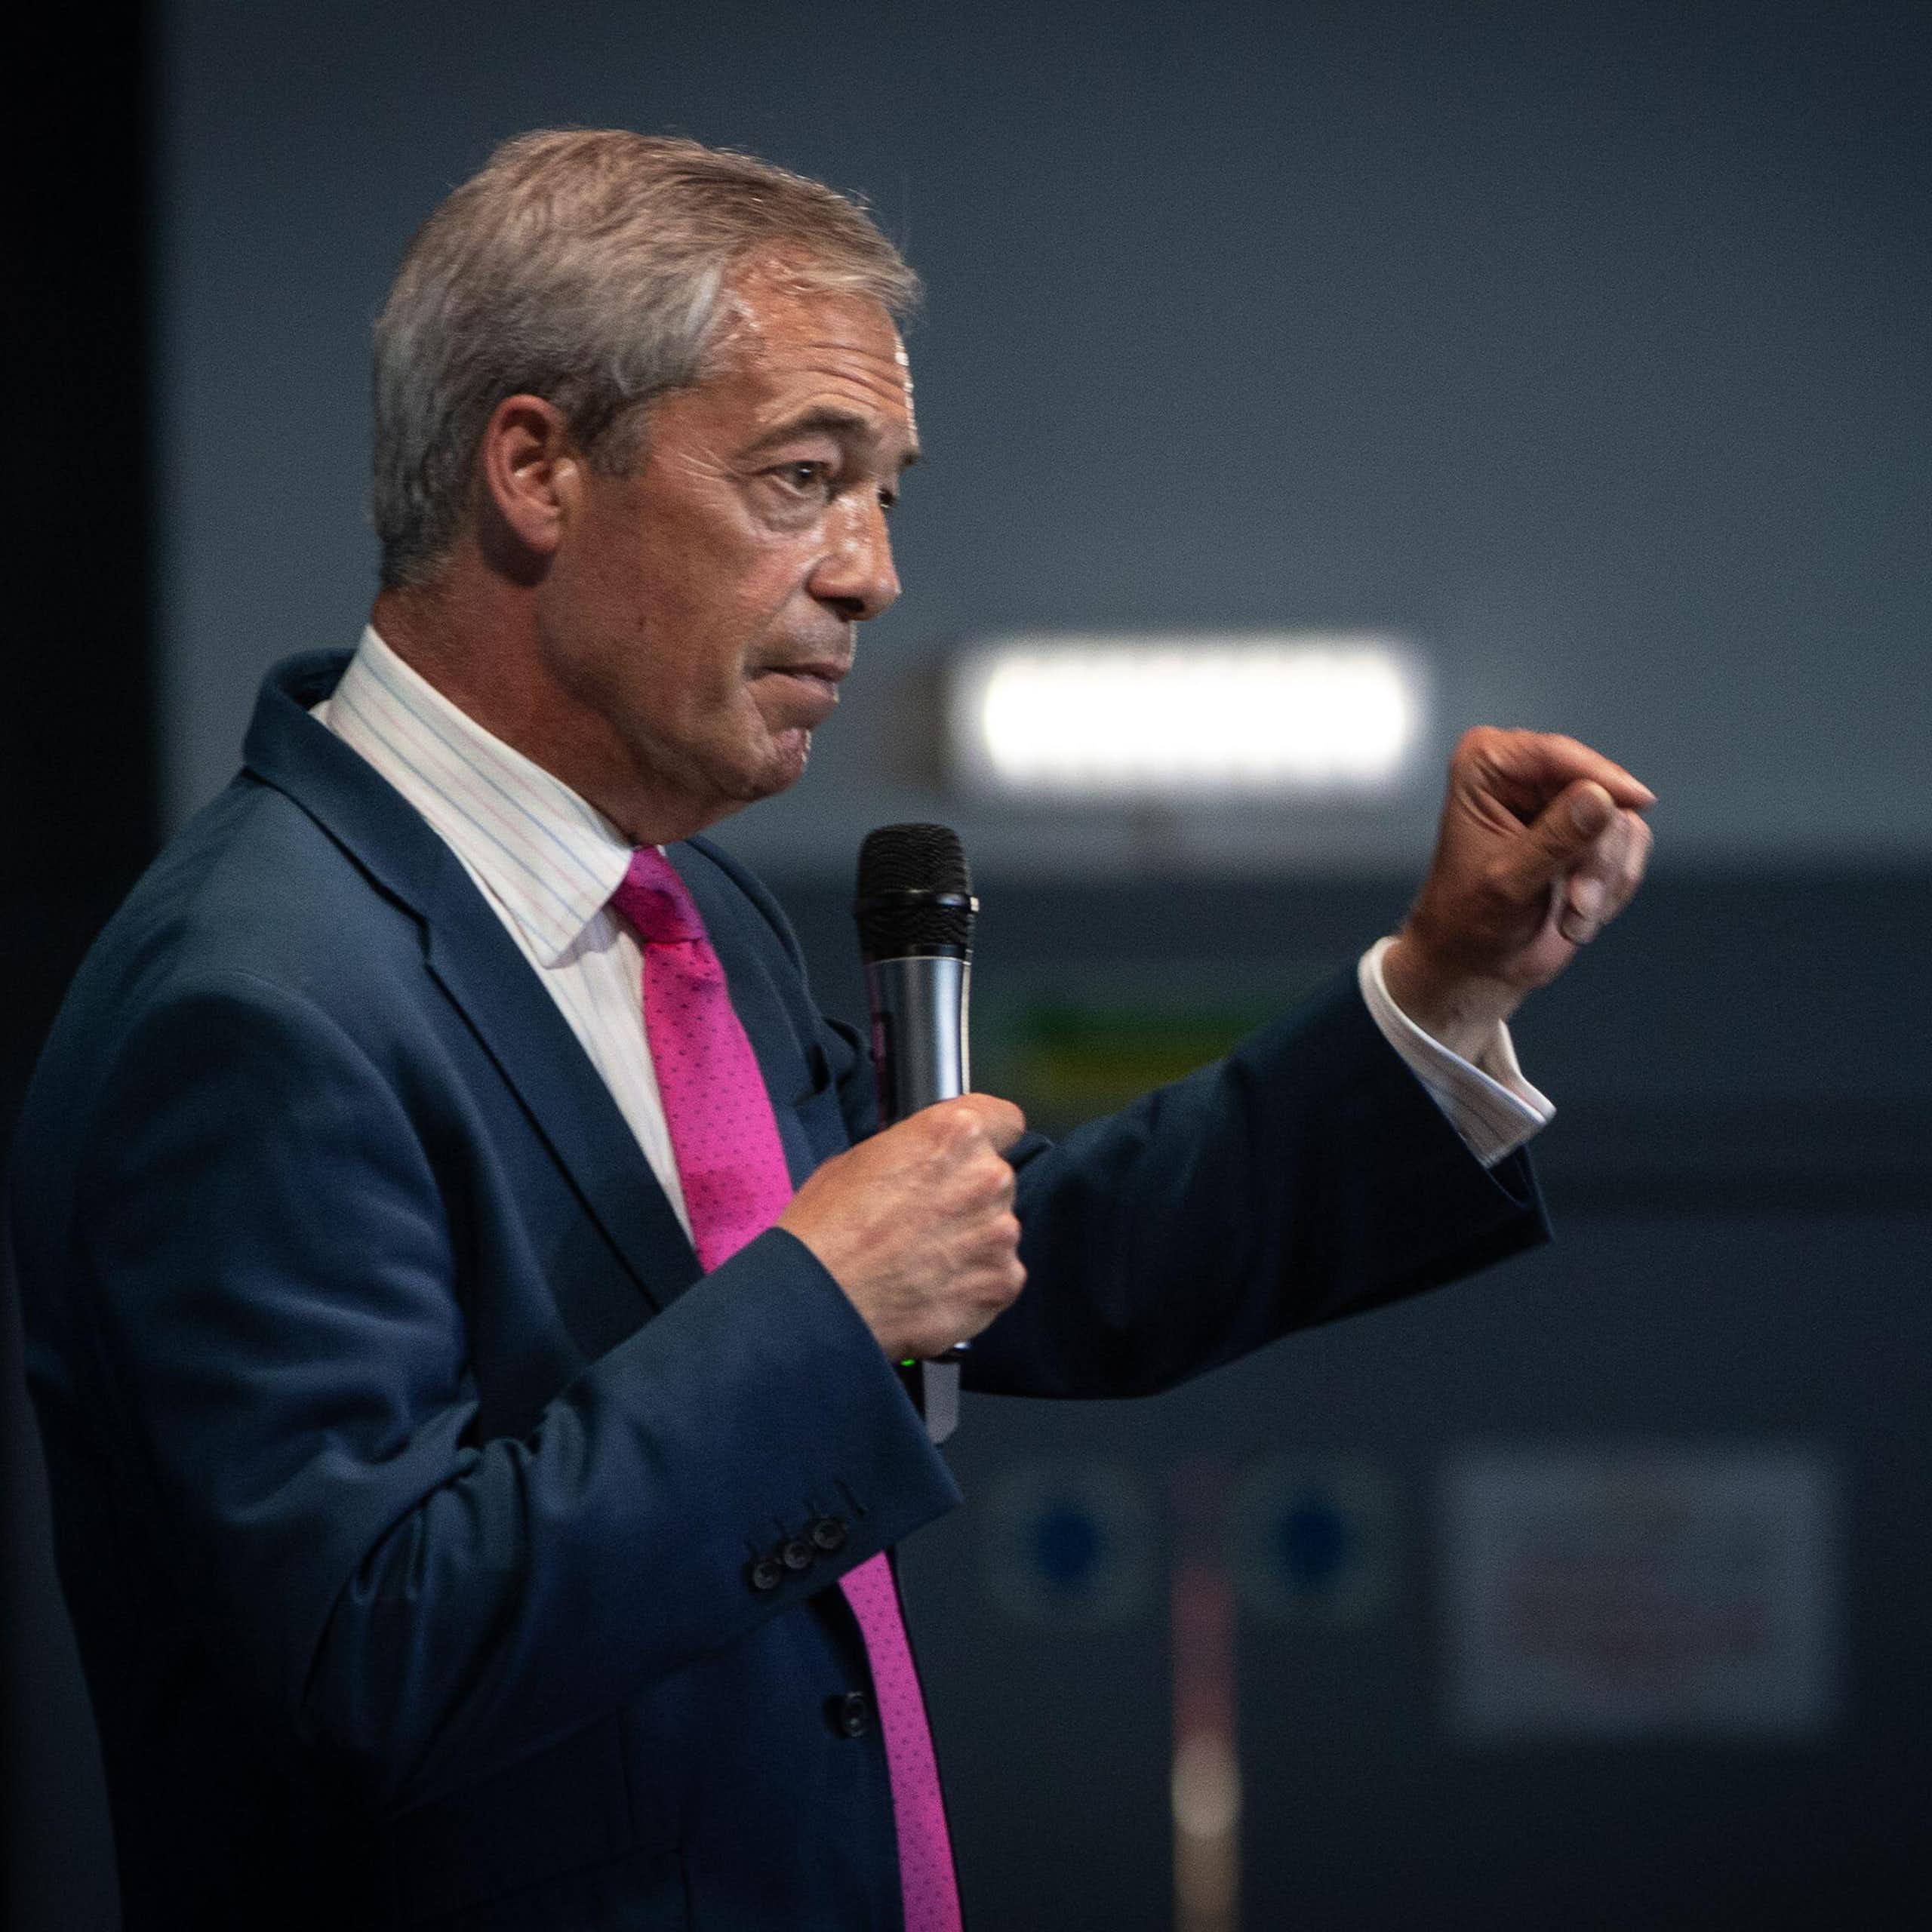 Side view of Nigel Farage holding a microphone and gesturing with his other hand